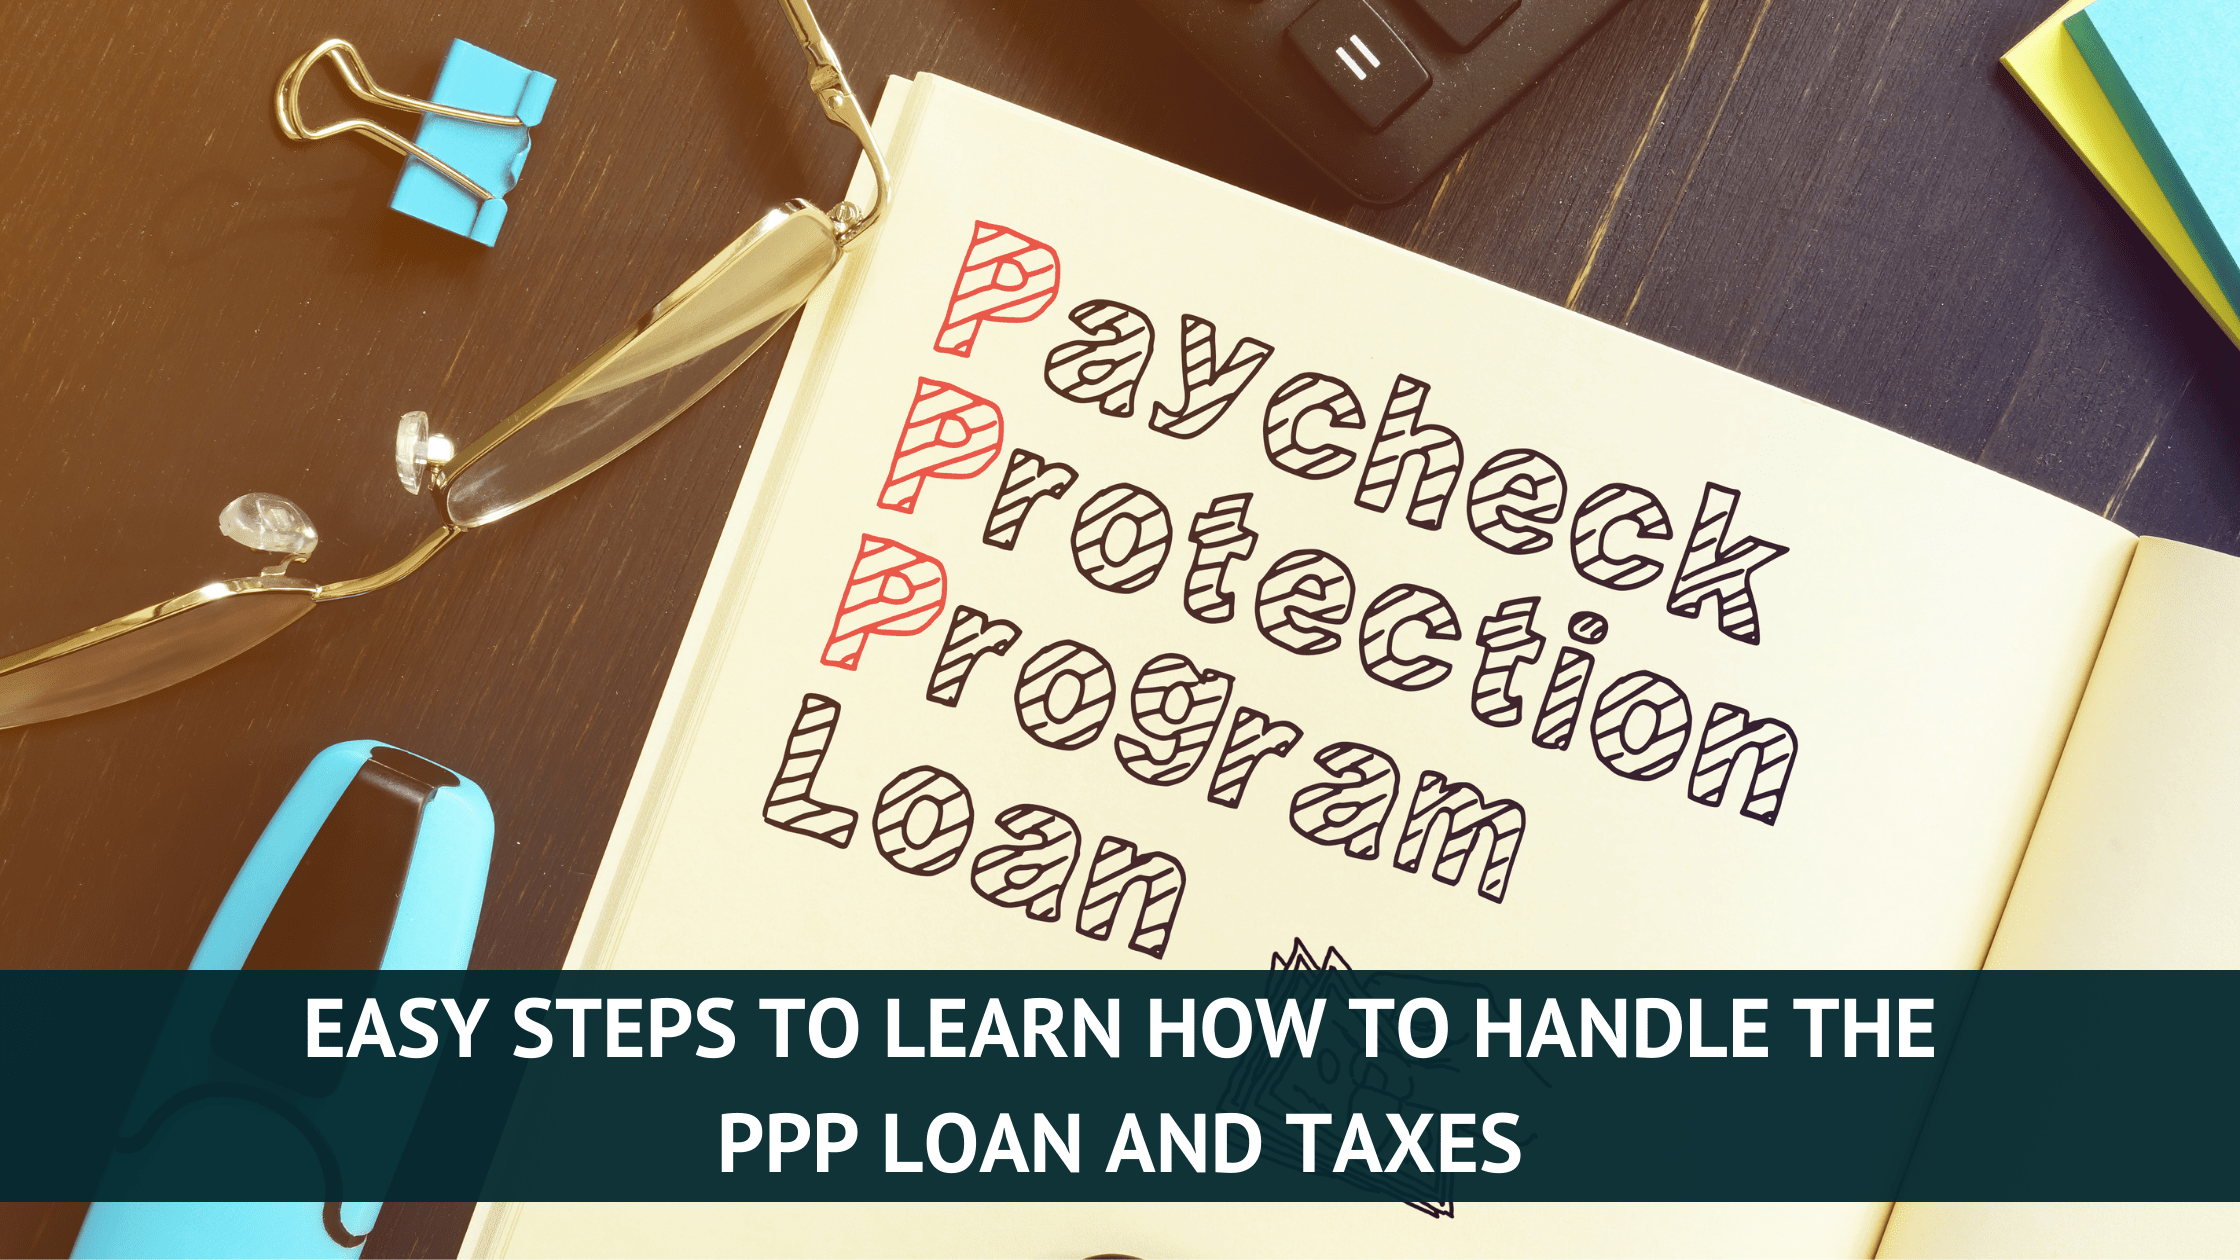 Easy-steps-to-learn-how-to-handle-the-PPP-loan-and-taxes-min